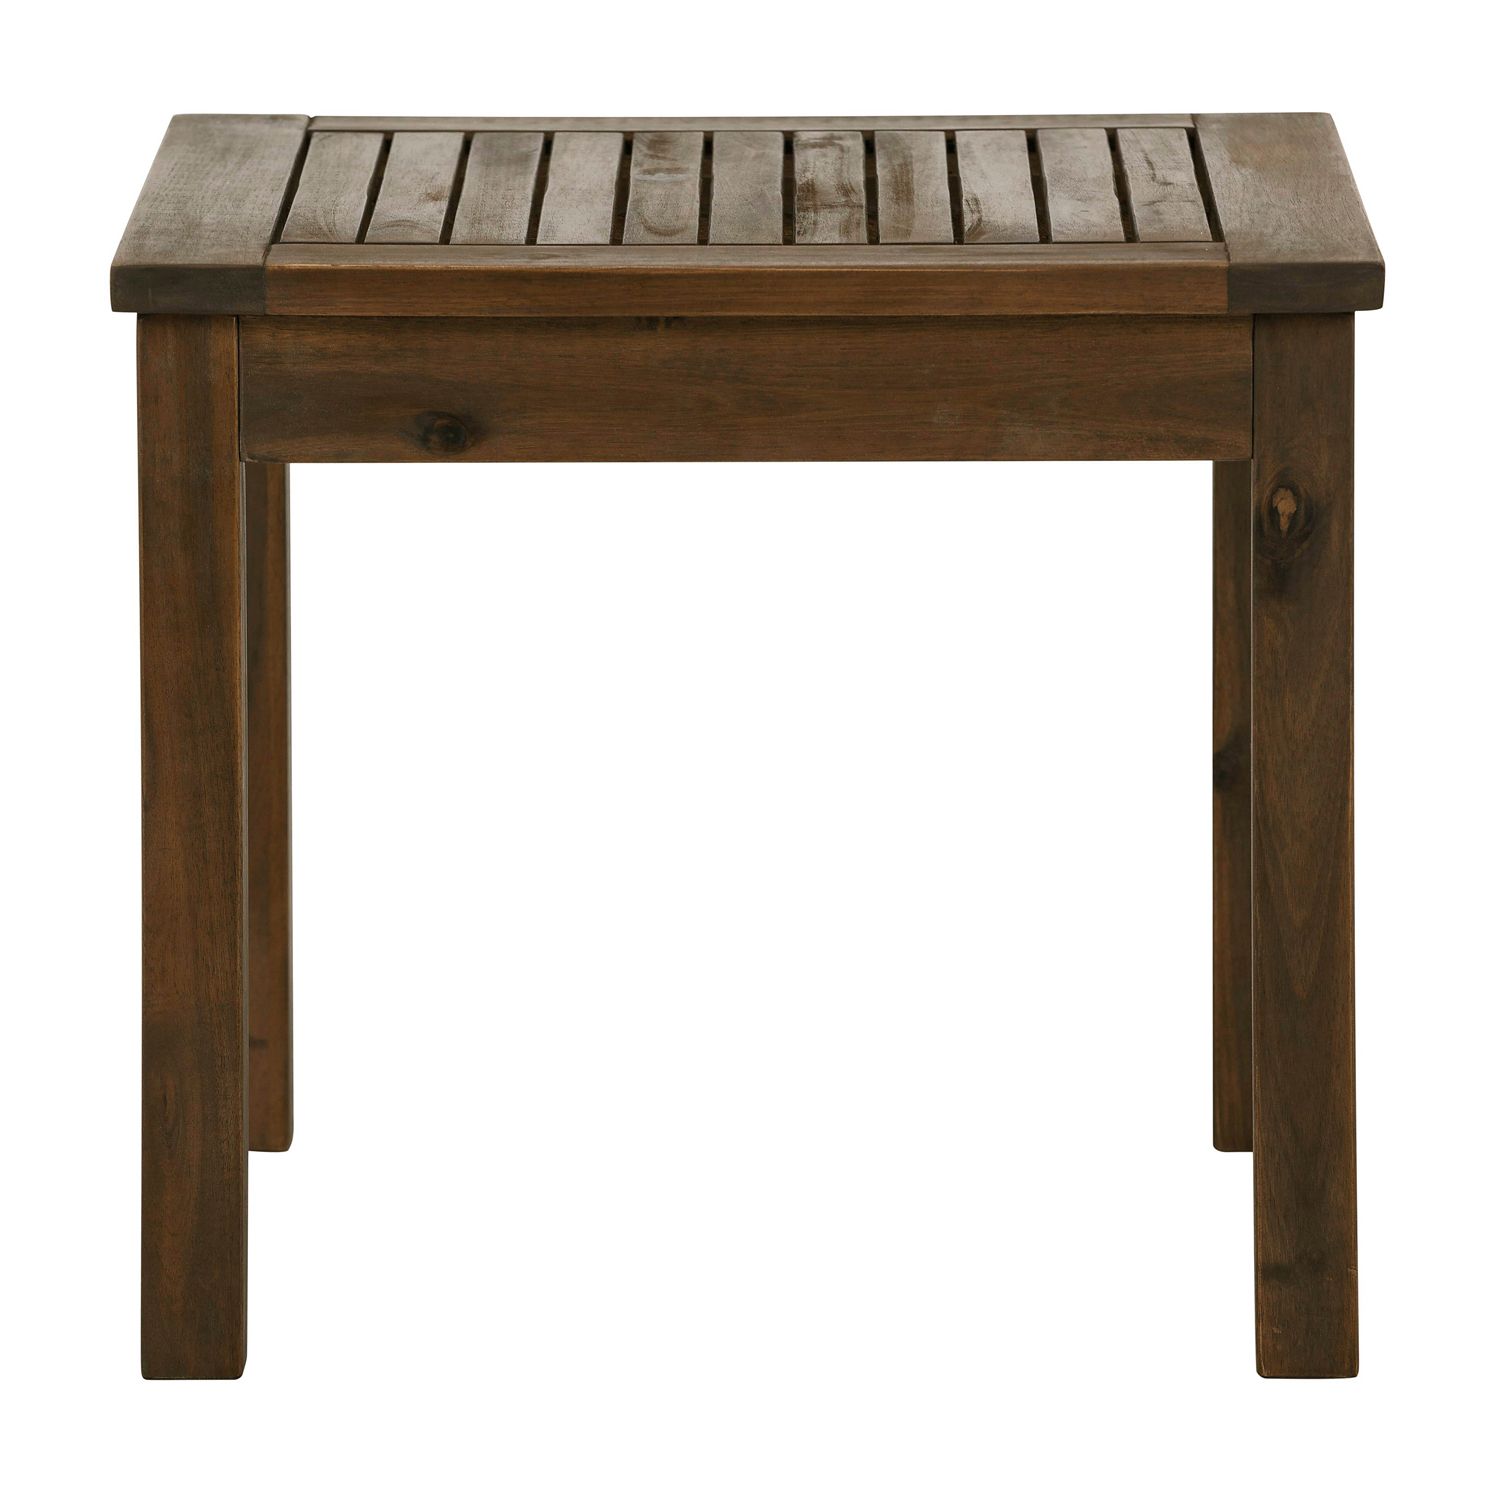 Natural Dark Oil Acacia Outdoor Arm Chairs Intended For 2020 Classic Acacia Wood Patio Side Table – Pier1 Imports (View 9 of 15)